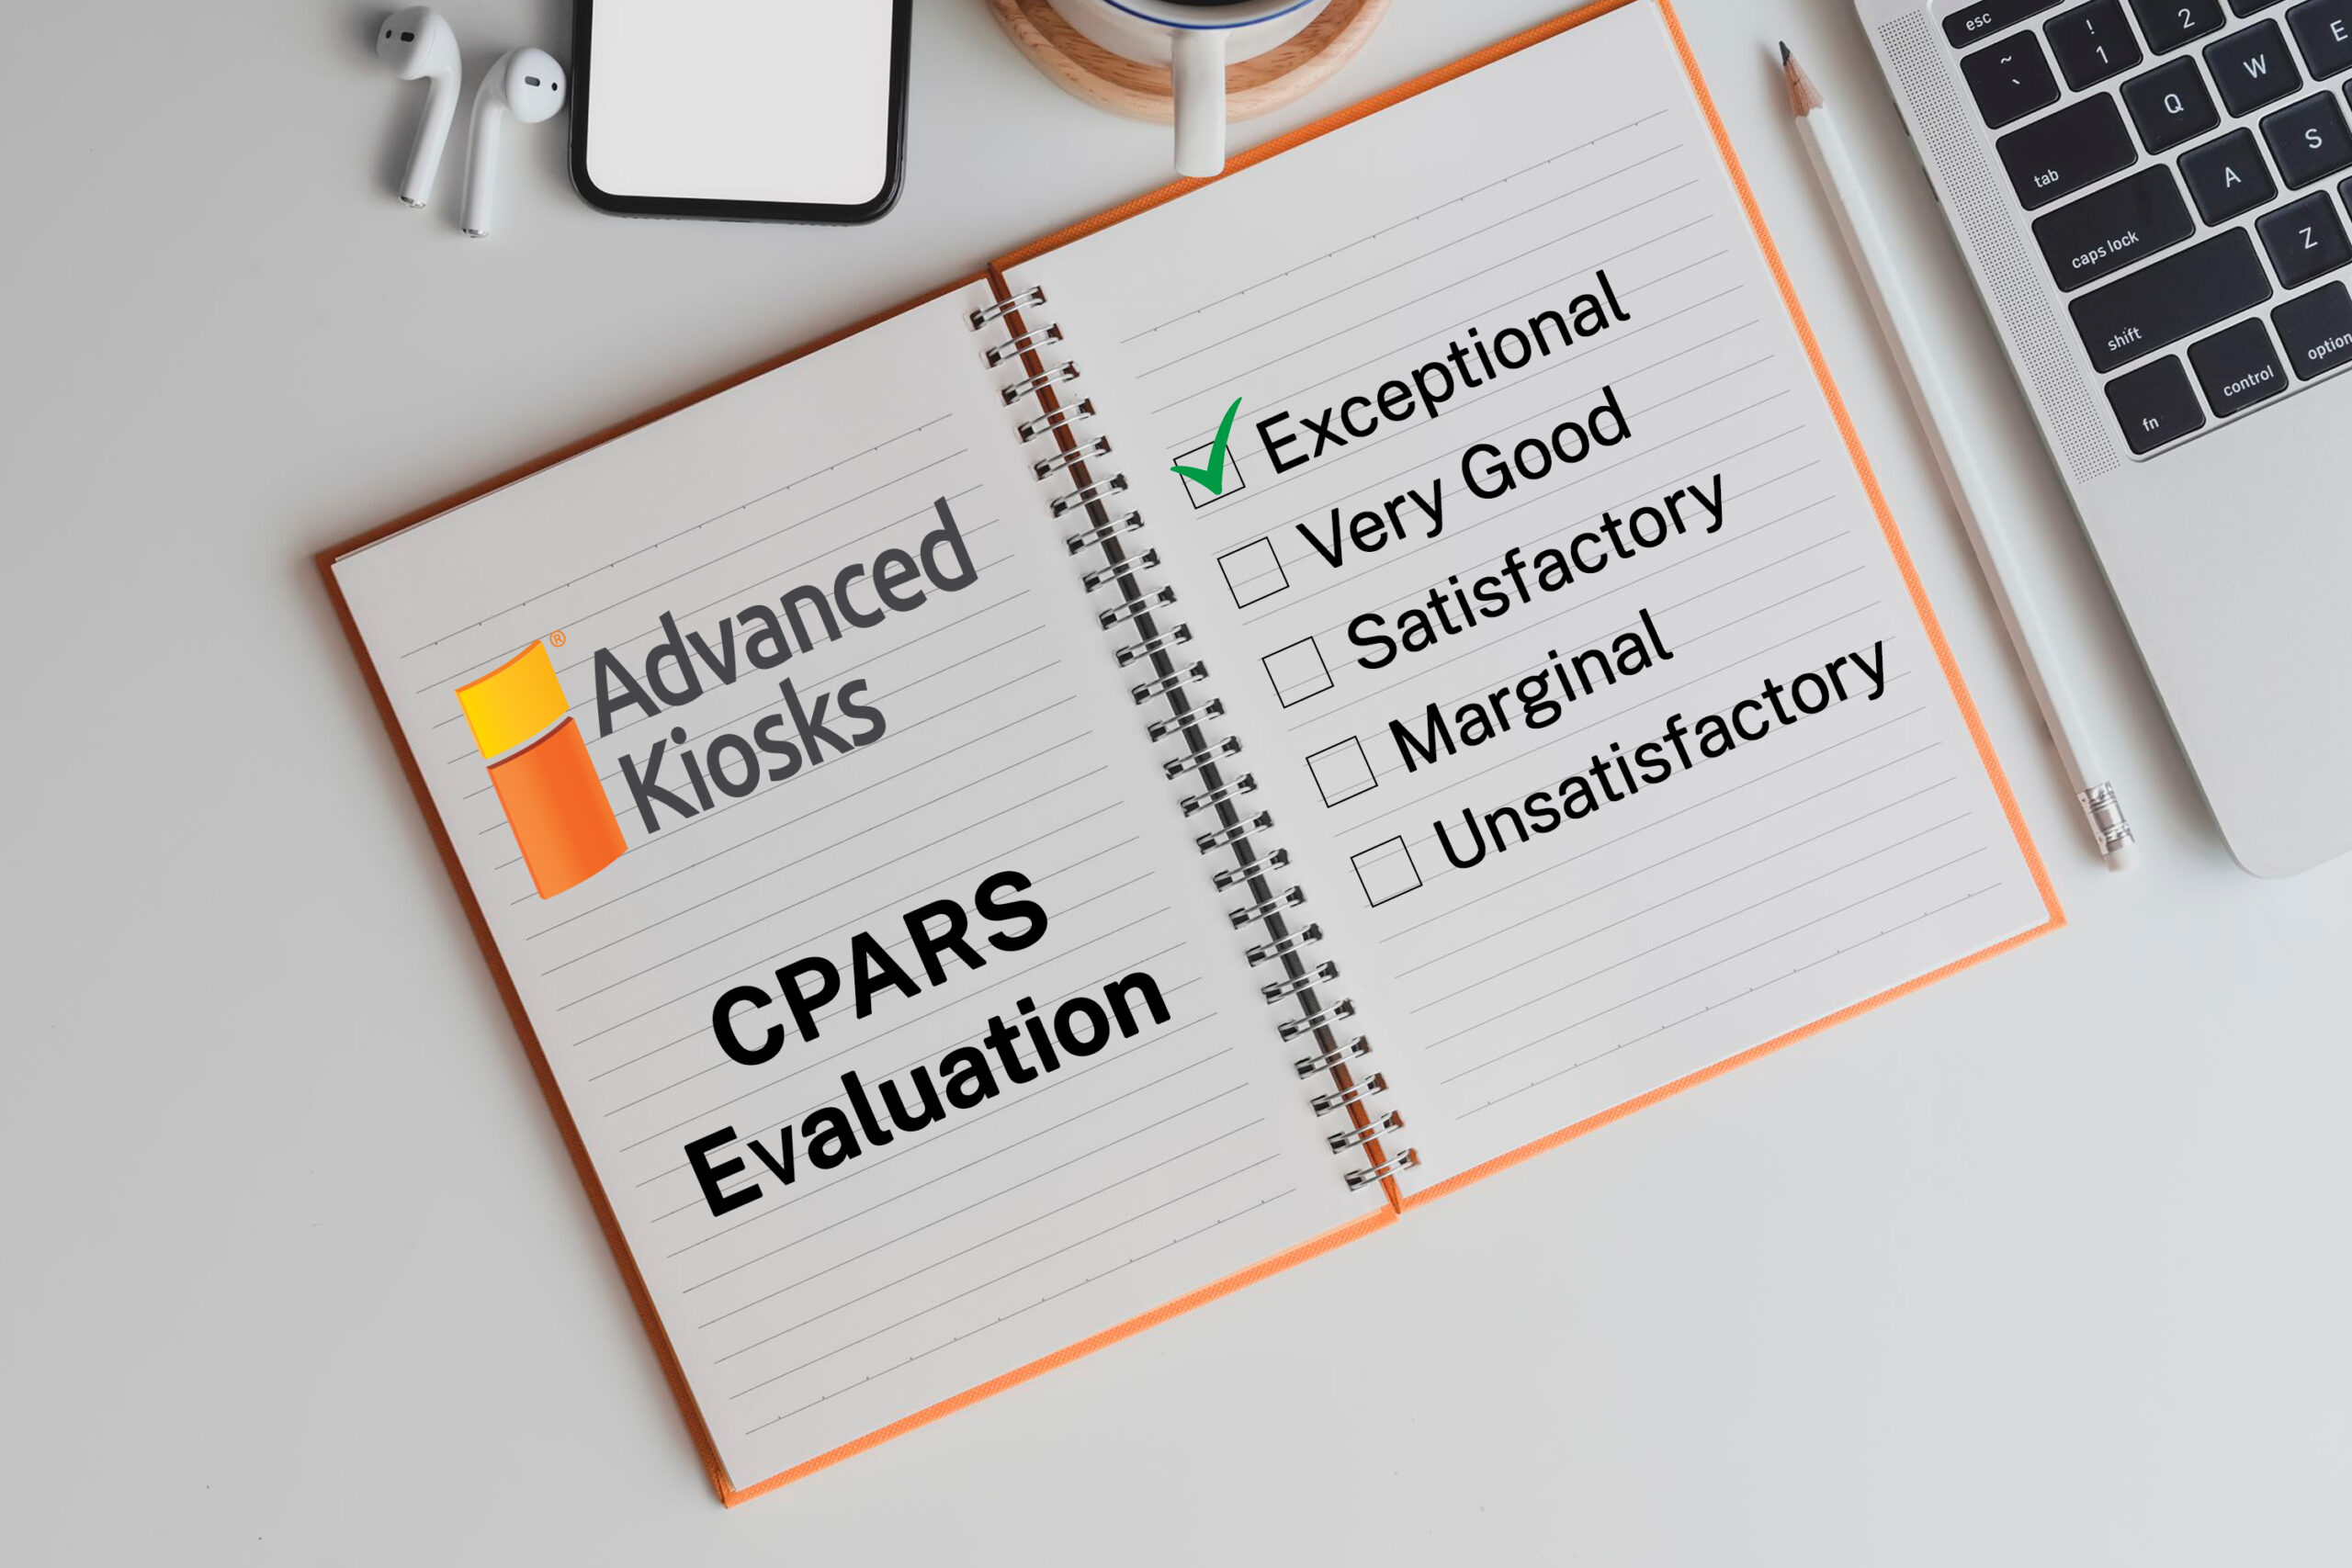 Advanced Kiosks Celebrates Exceptional CPARS Rating and Successful Government Projects